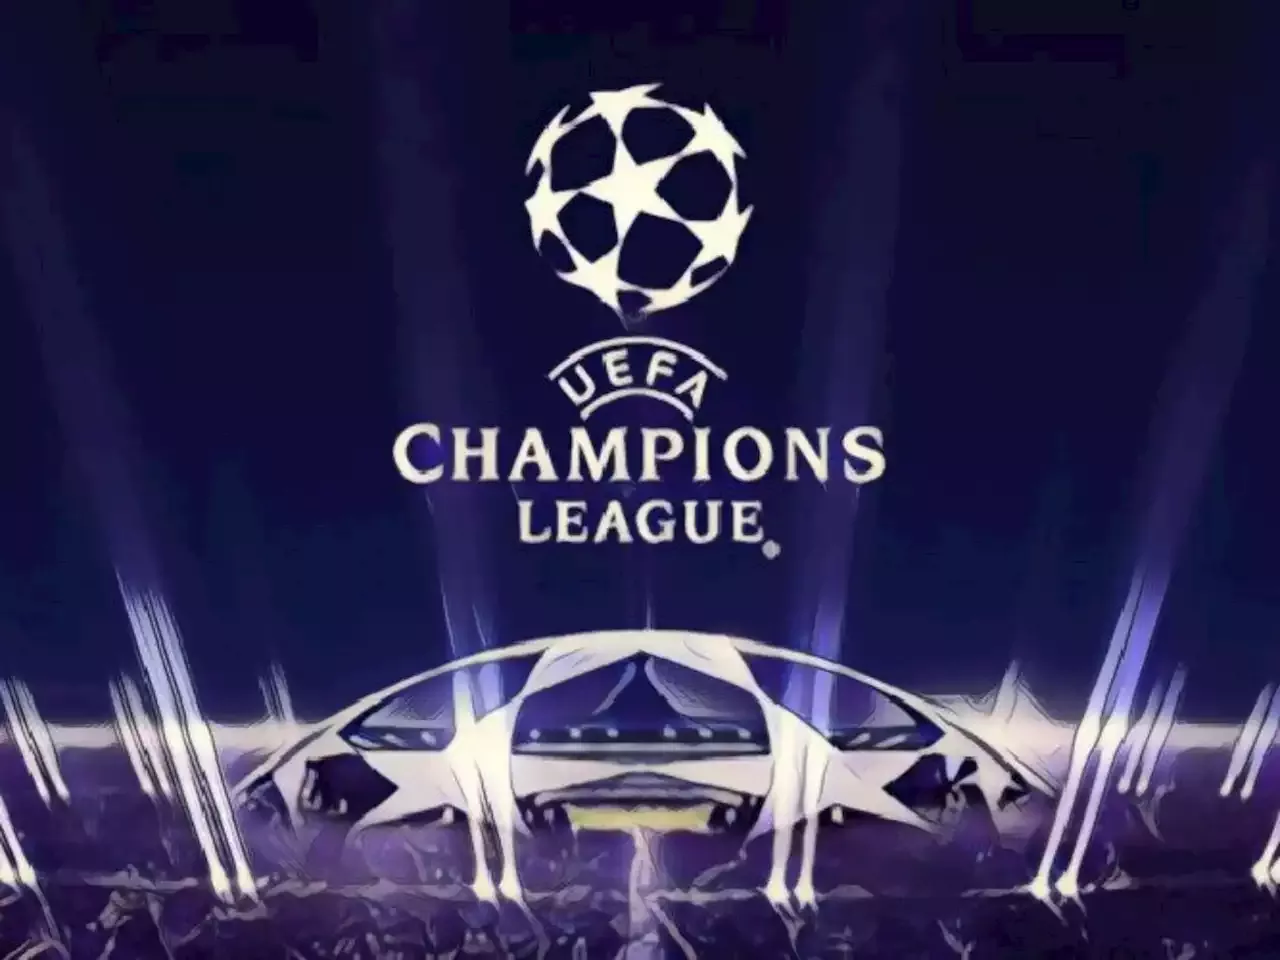 Champions League Seeds for 2023/2024 group stage draw confirmed